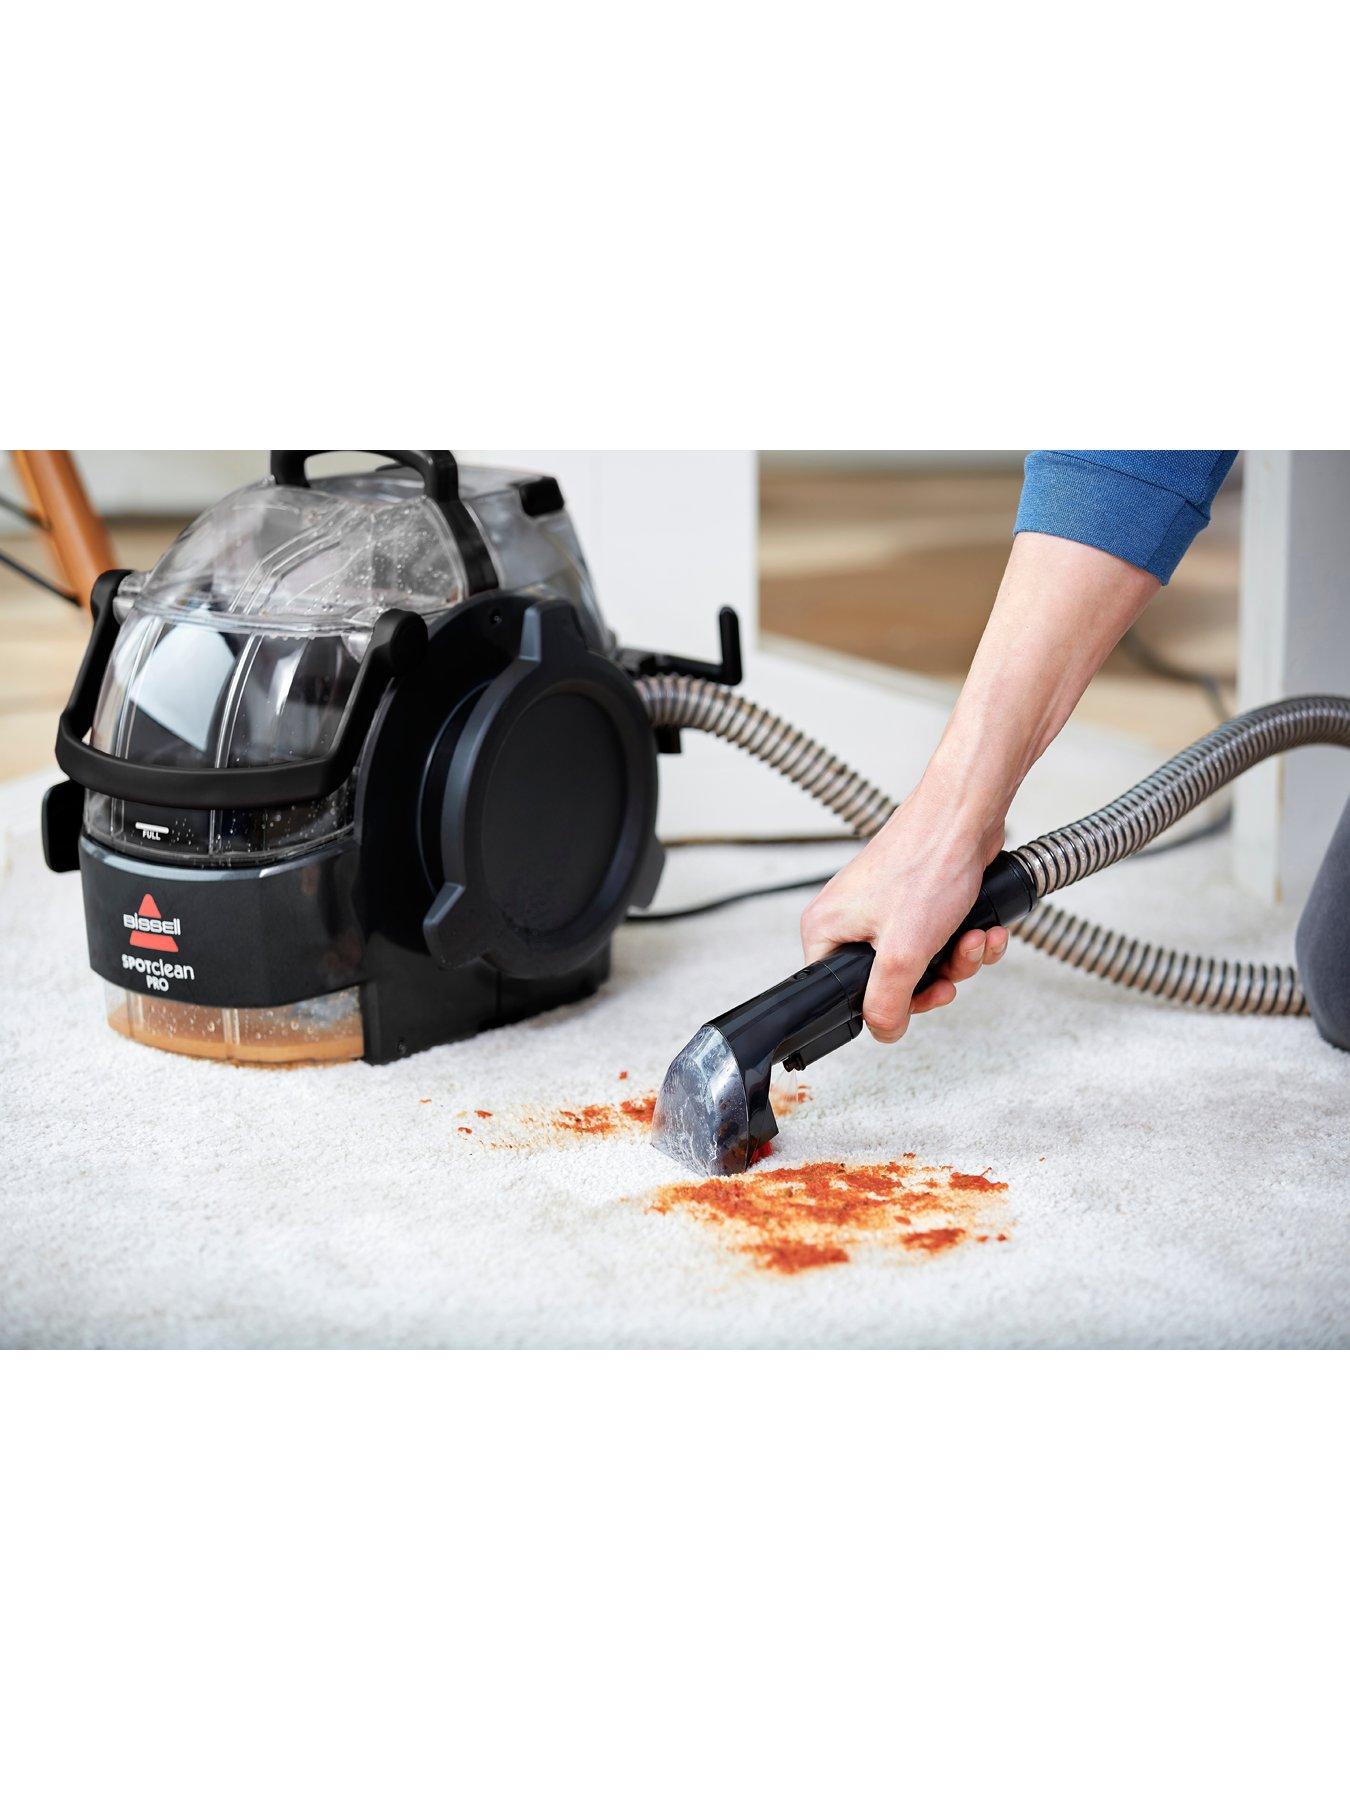 BISSELL SpotClean Pro 1558E, Most Powerful Portable Professional Carpet  Cleaner, 750W Power Suction, Removes Spots, Spills & Stains, Cleans Carpets  Stairs, Upholstery and Car Seats, Black